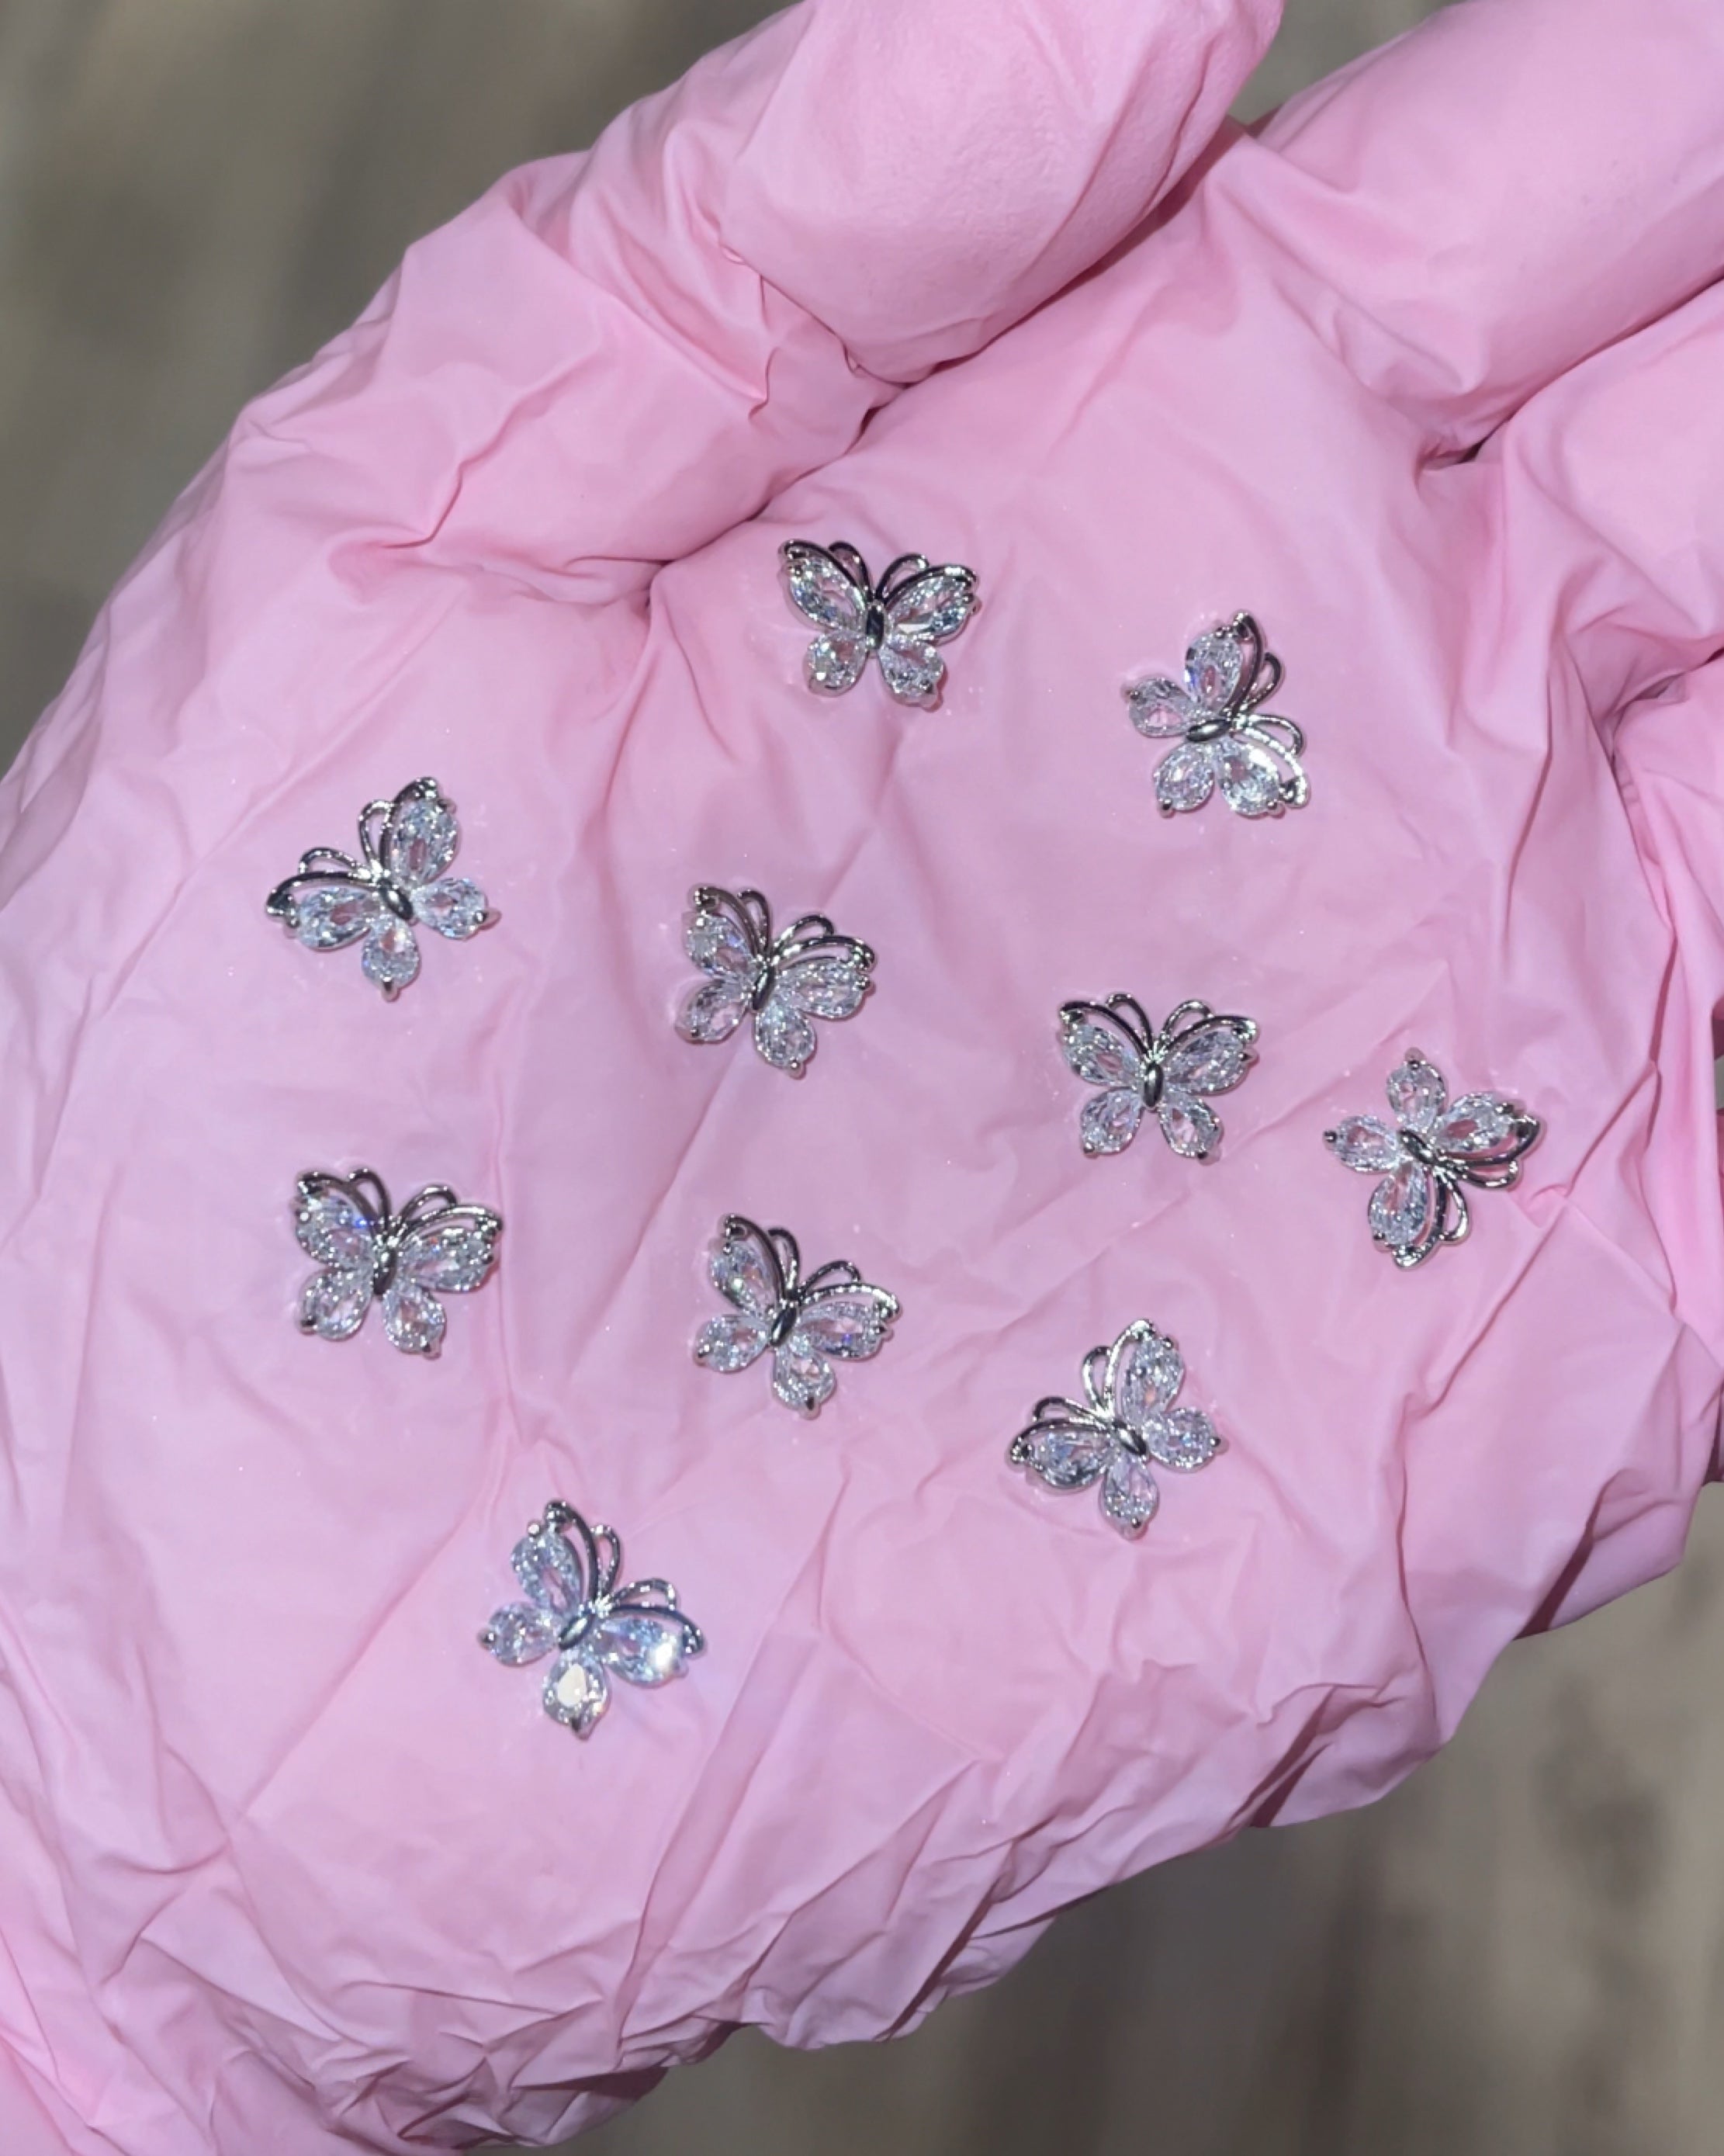 CRYSTAL BUTTERFLY CHARM - 4 PCS